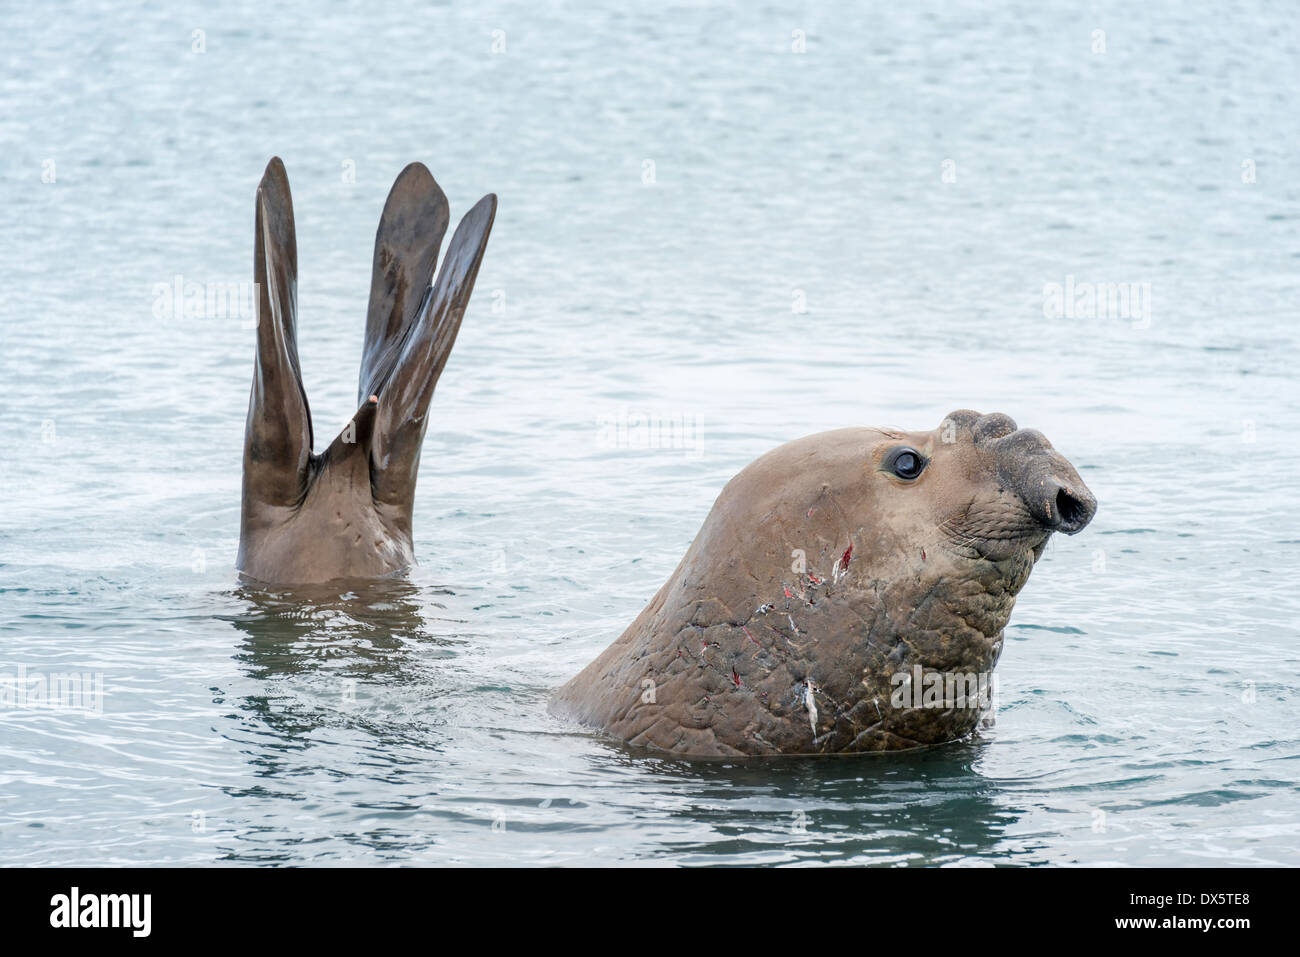 Hopeful young male Southern elephant seal in near shore in water Stock Photo